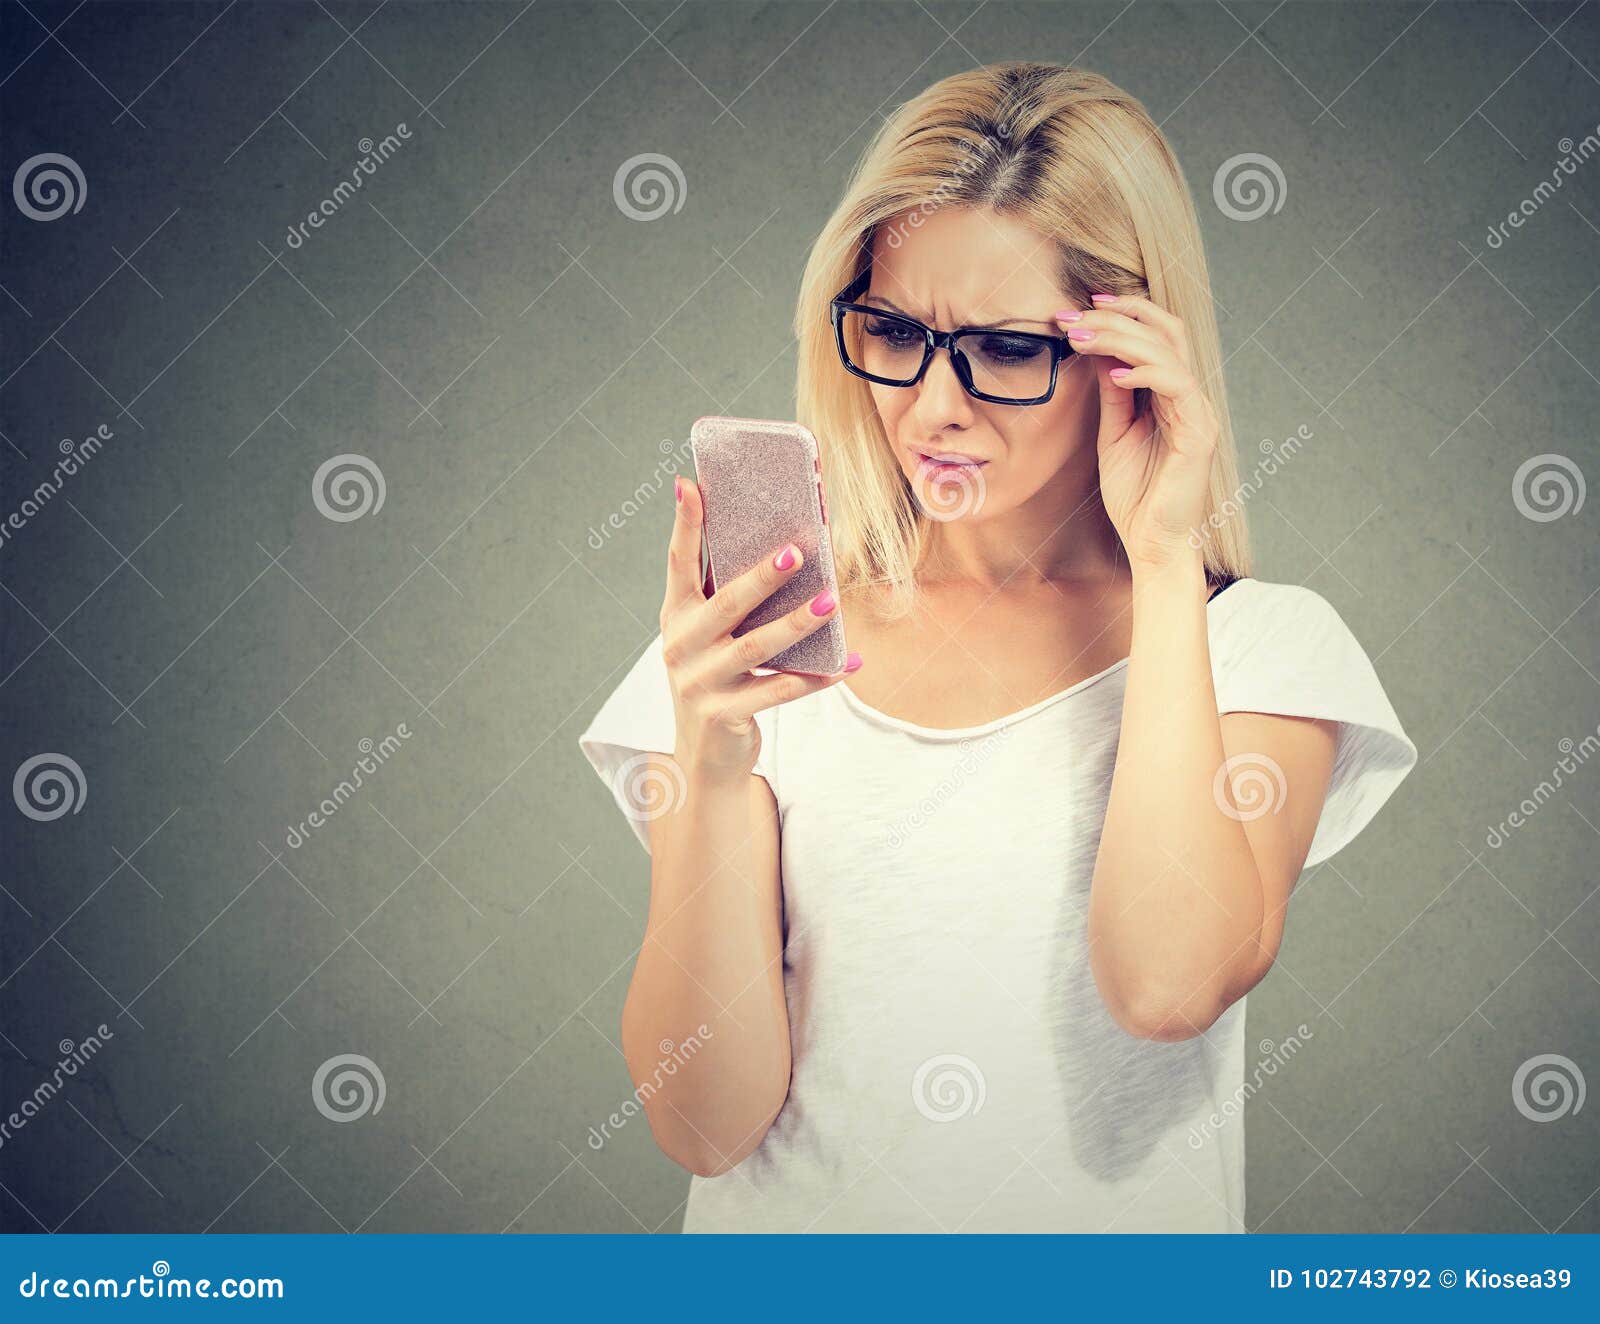 annoyed upset woman in glasses looking at her cell phone with frustration